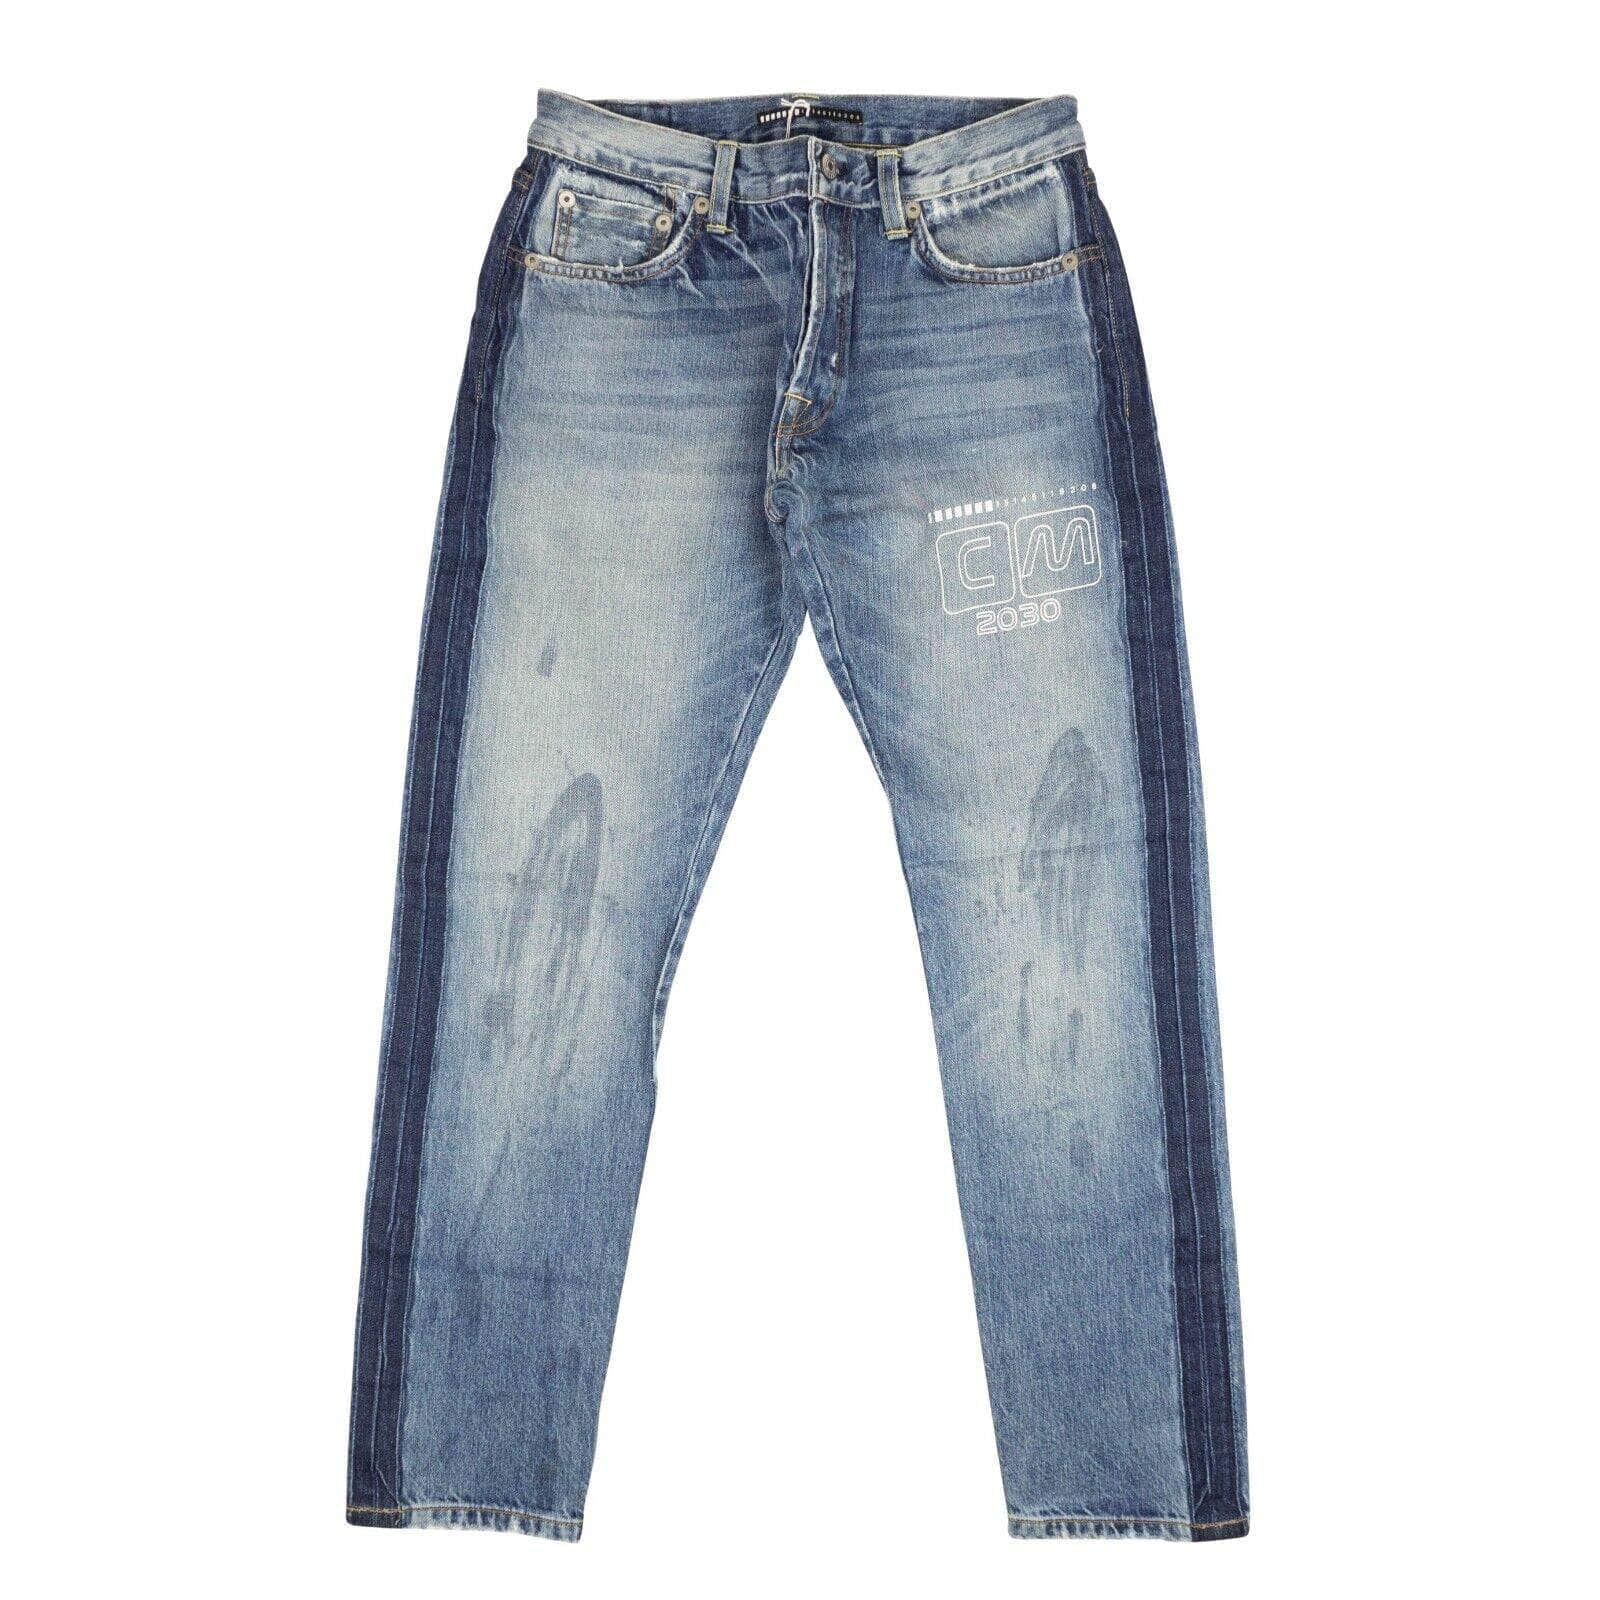 Visitor on Earth 250-500, channelenable-all, chicmi, couponcollection, gender-mens, main-clothing, mens-shoes, mens-slim-fit-jeans, size-28, size-29, size-30, size-31, size-32, size-33, size-34, size-36, visitor-on-earth Blue Washed Denim Jeans